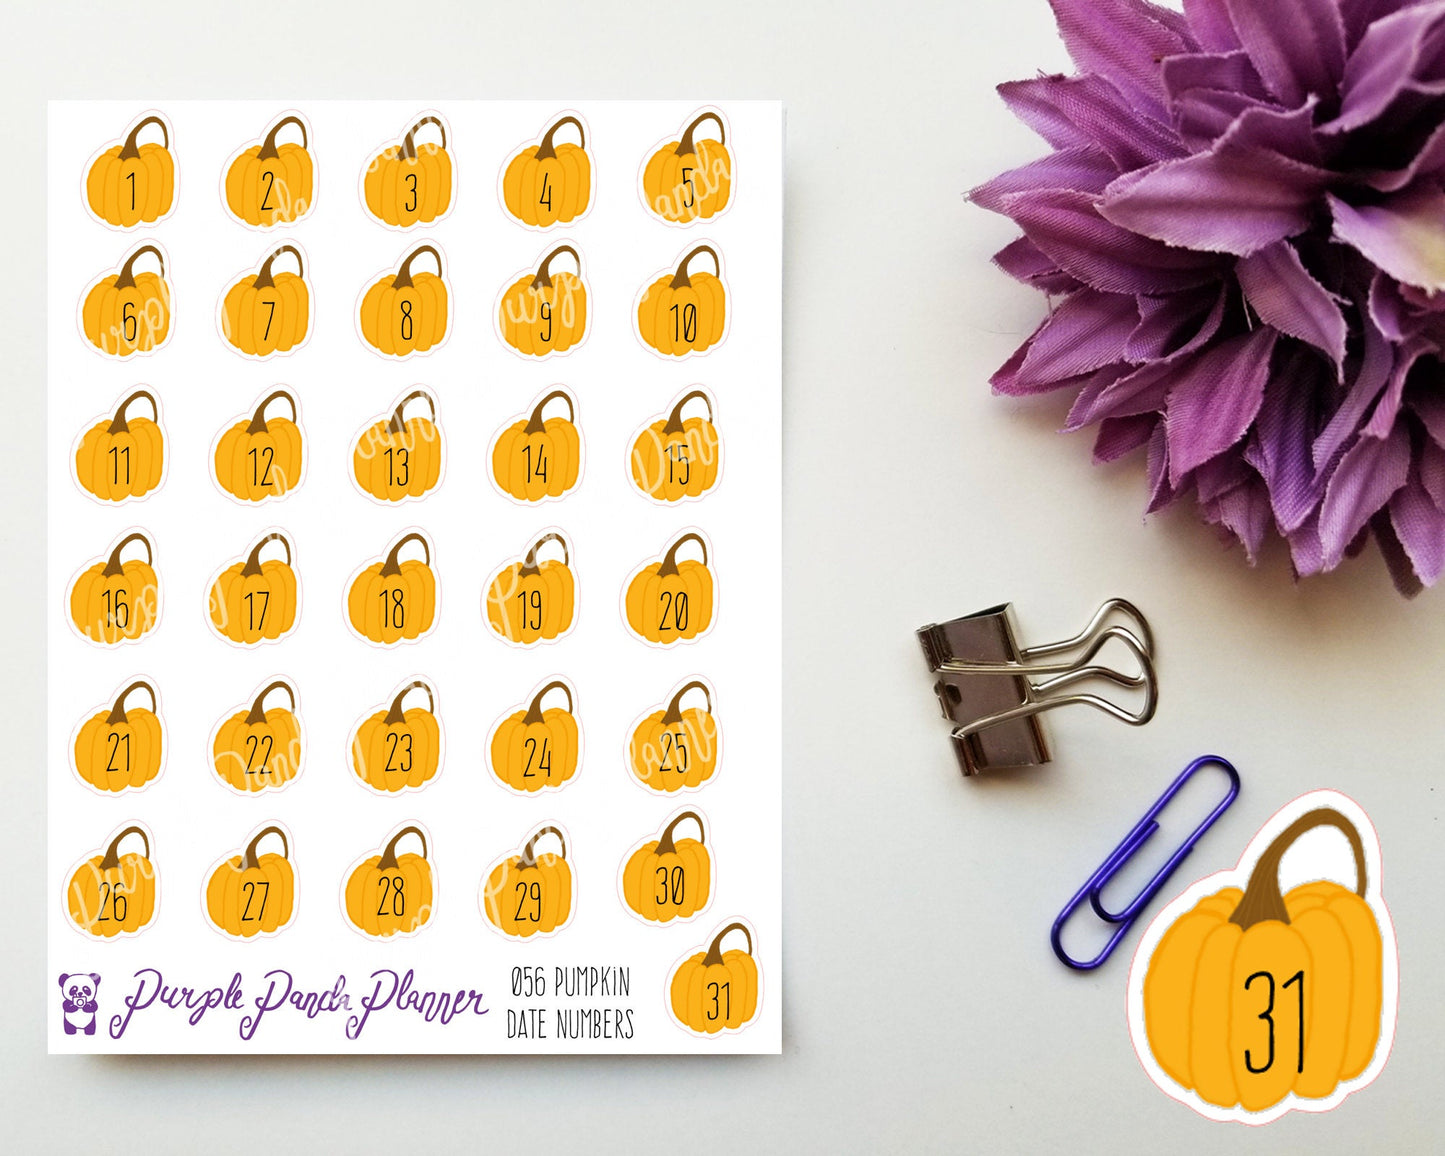 Pumpkin Date Number Stickers for Planner or Bullet Journal Functional Planning, 056